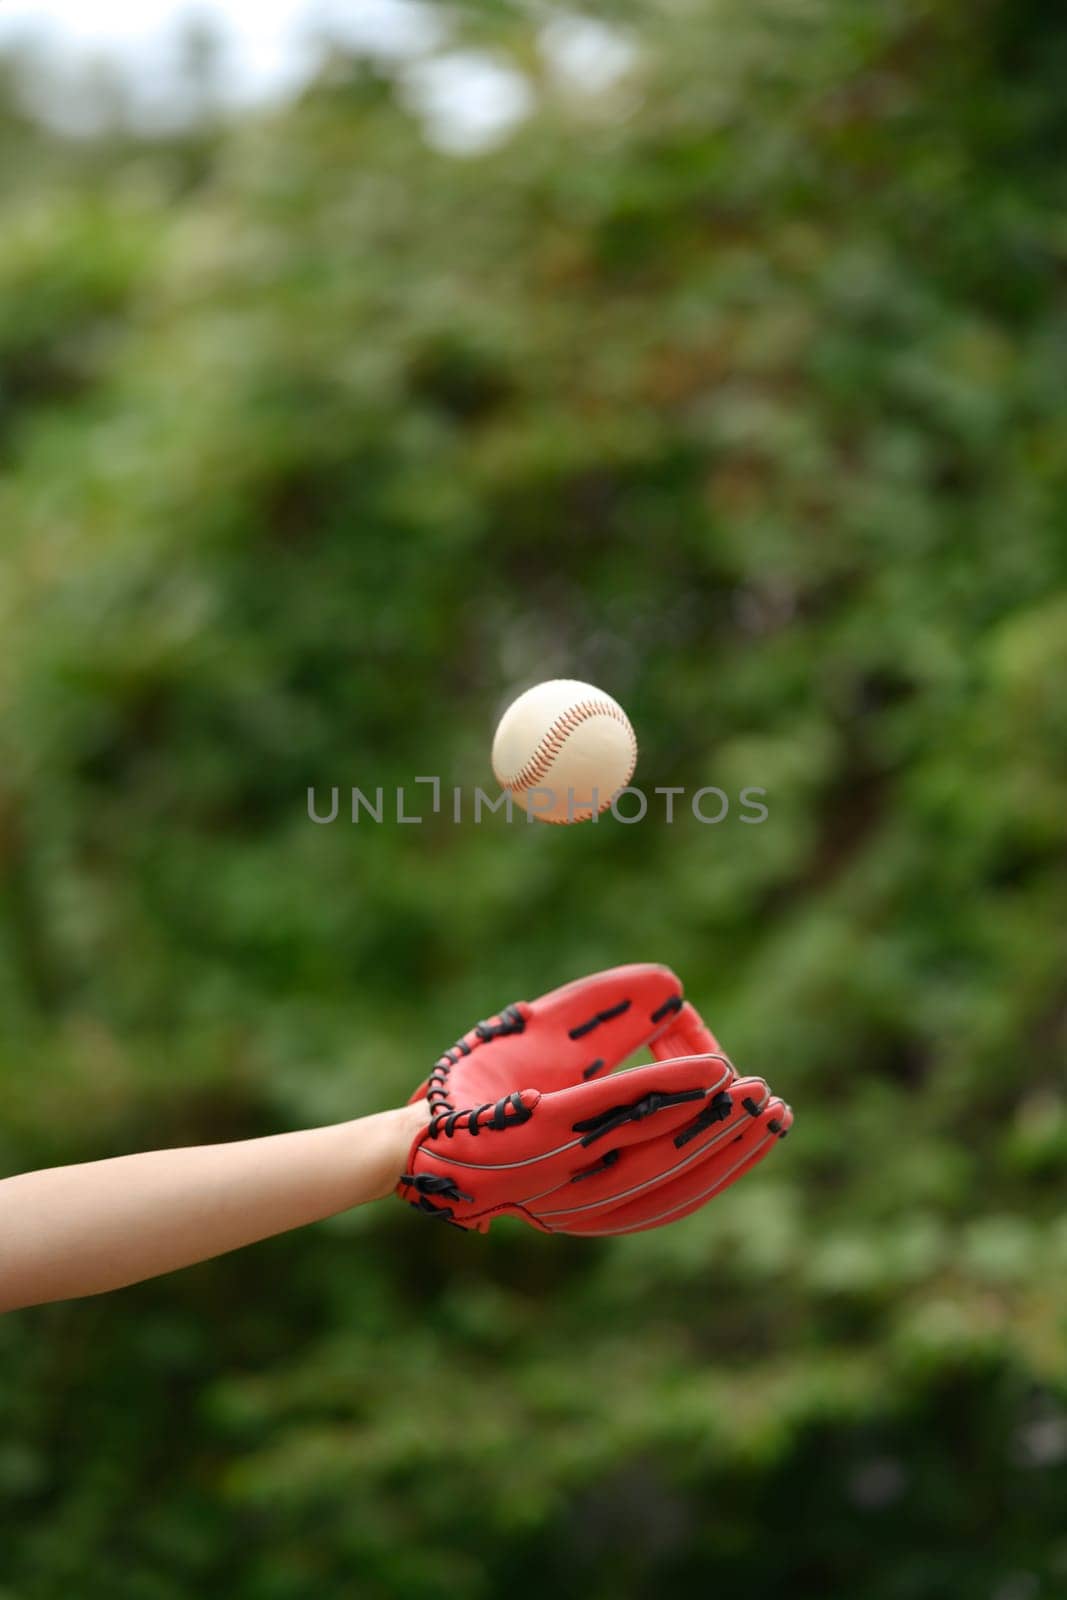 Baseball player in leather baseball glove catching a ball. Sport, activity and people concept.